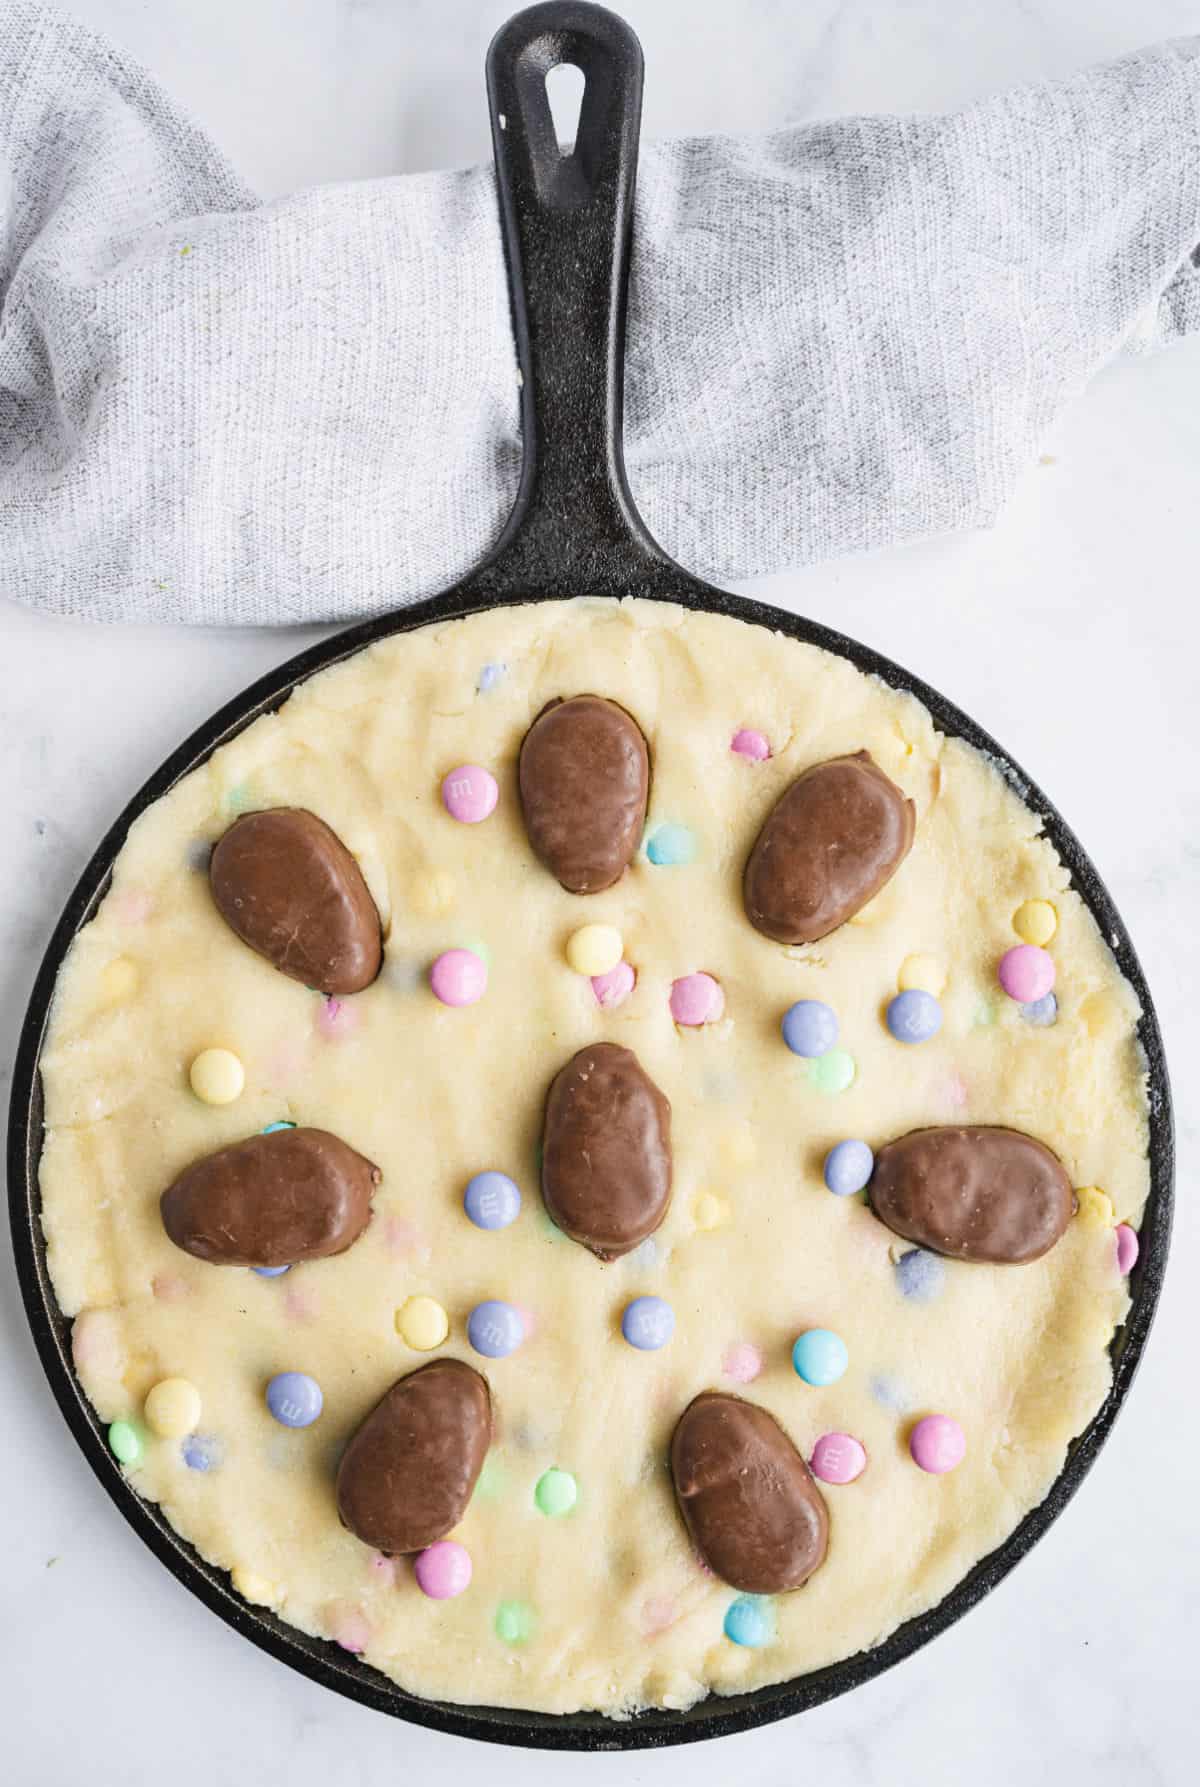 Unbaked skillet sugar cookie with reese's eggs on top.